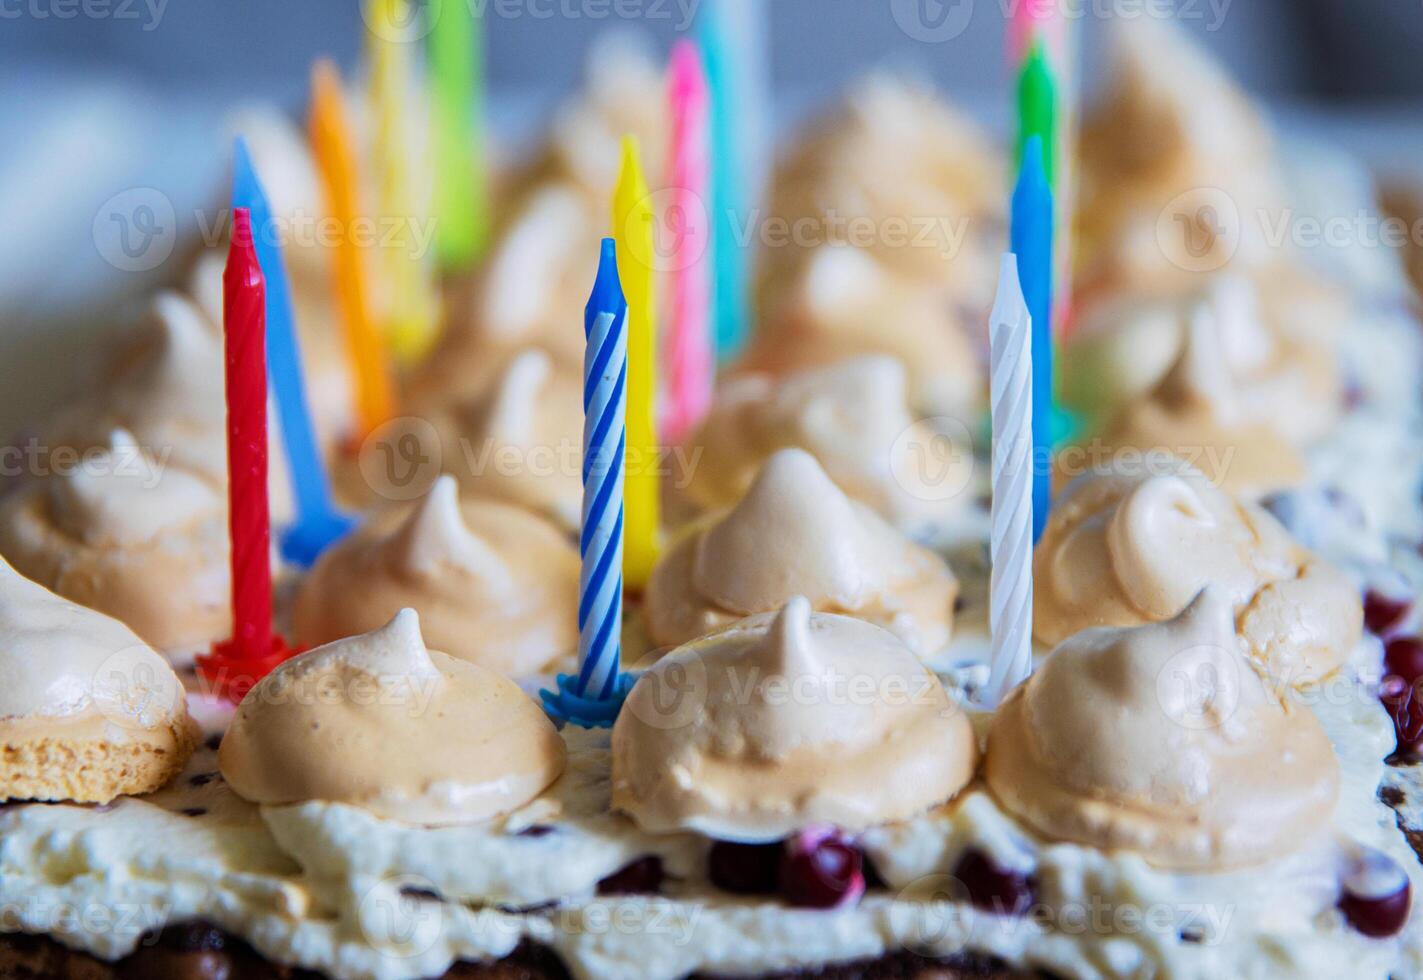 Birthday cake with white whipped cream, meringues and cranberries, decorated with multicolored lit candles. Happy Birthday concept. Tradition of making a wish blowing out candles. Selective focus. photo